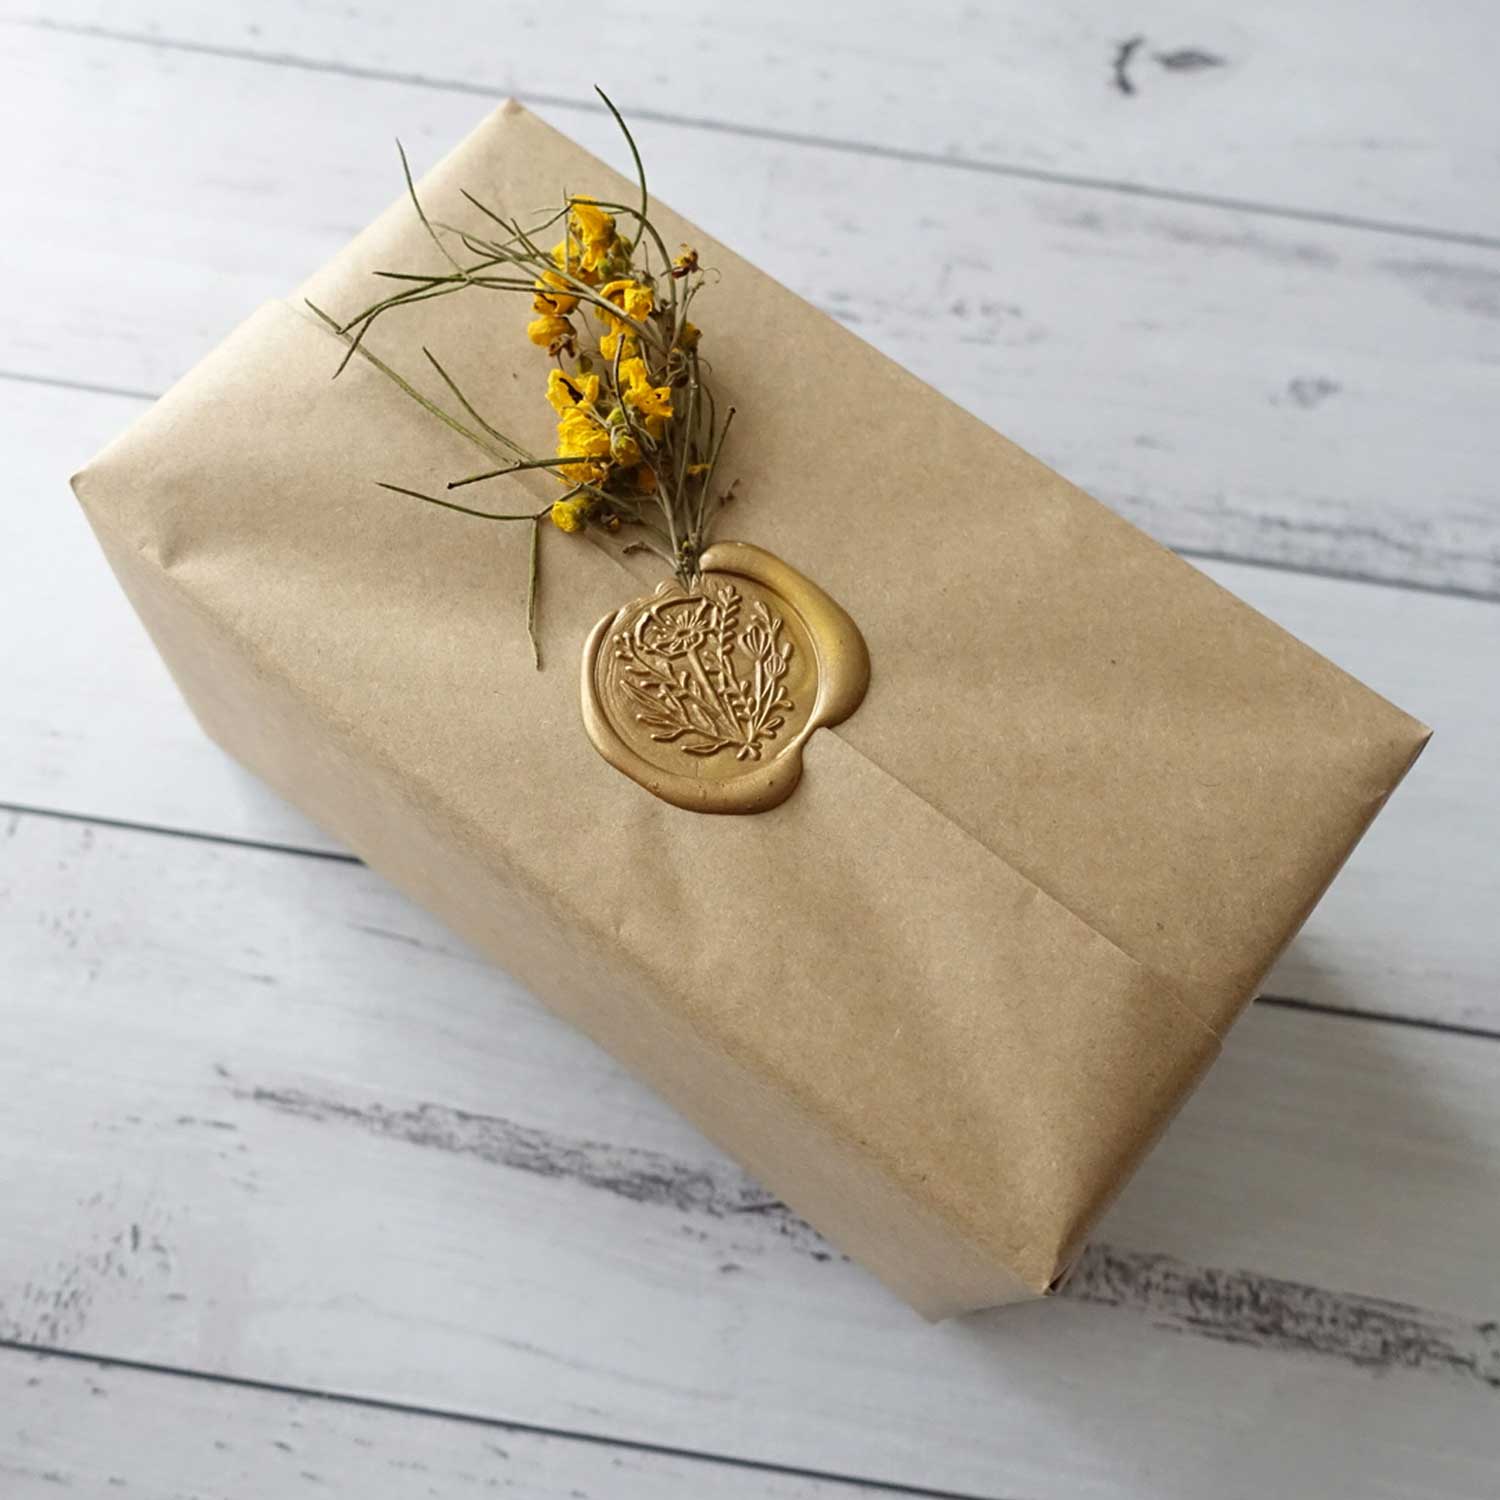 Wild flower poppy wax seal stamp for creative gift packaging wrapping idea